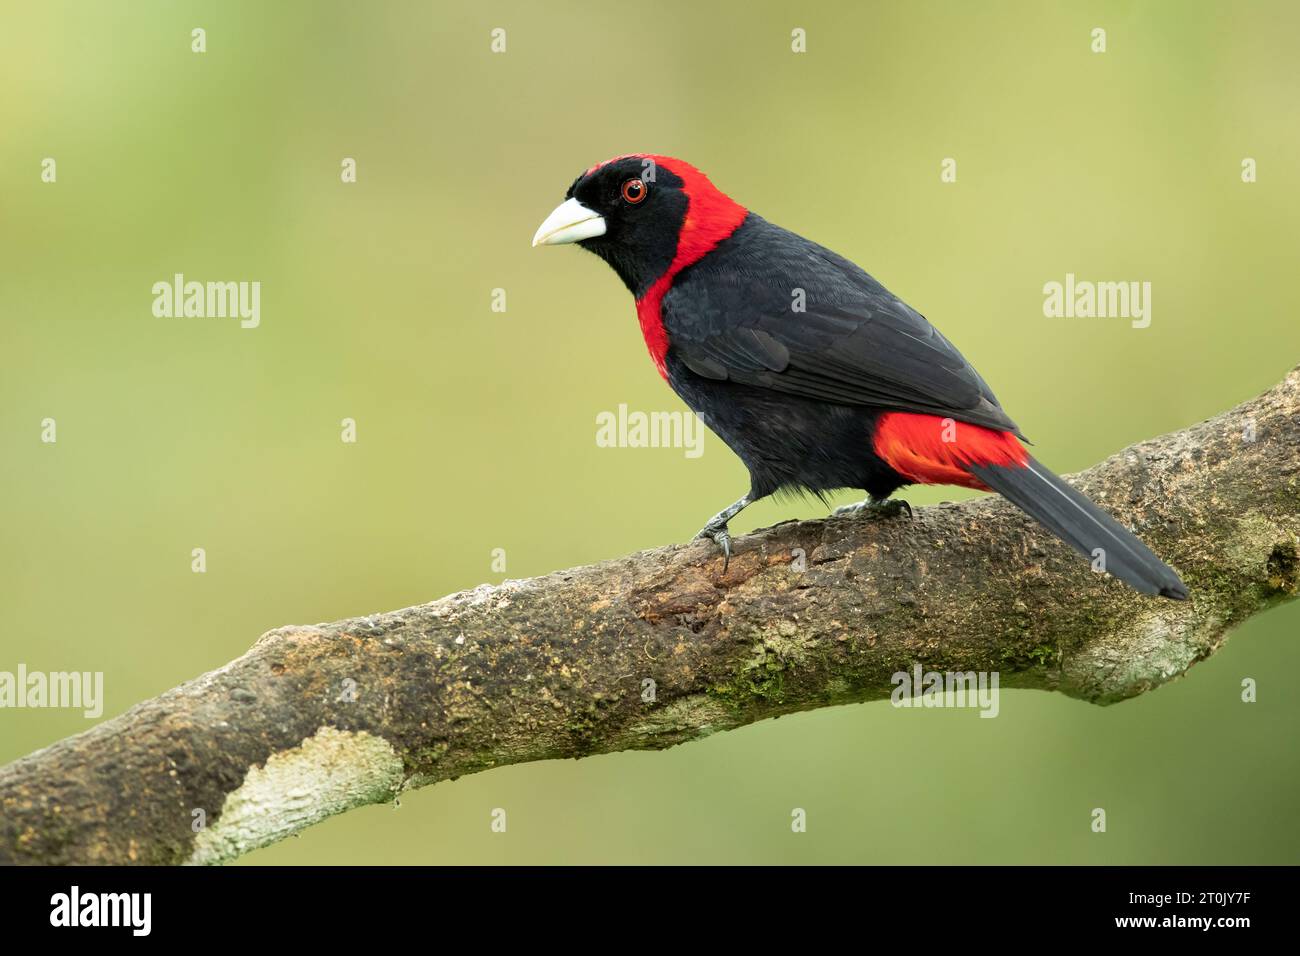 The crimson-collared tanager (Ramphocelus sanguinolentus) is a rather small Middle American songbird. Stock Photo